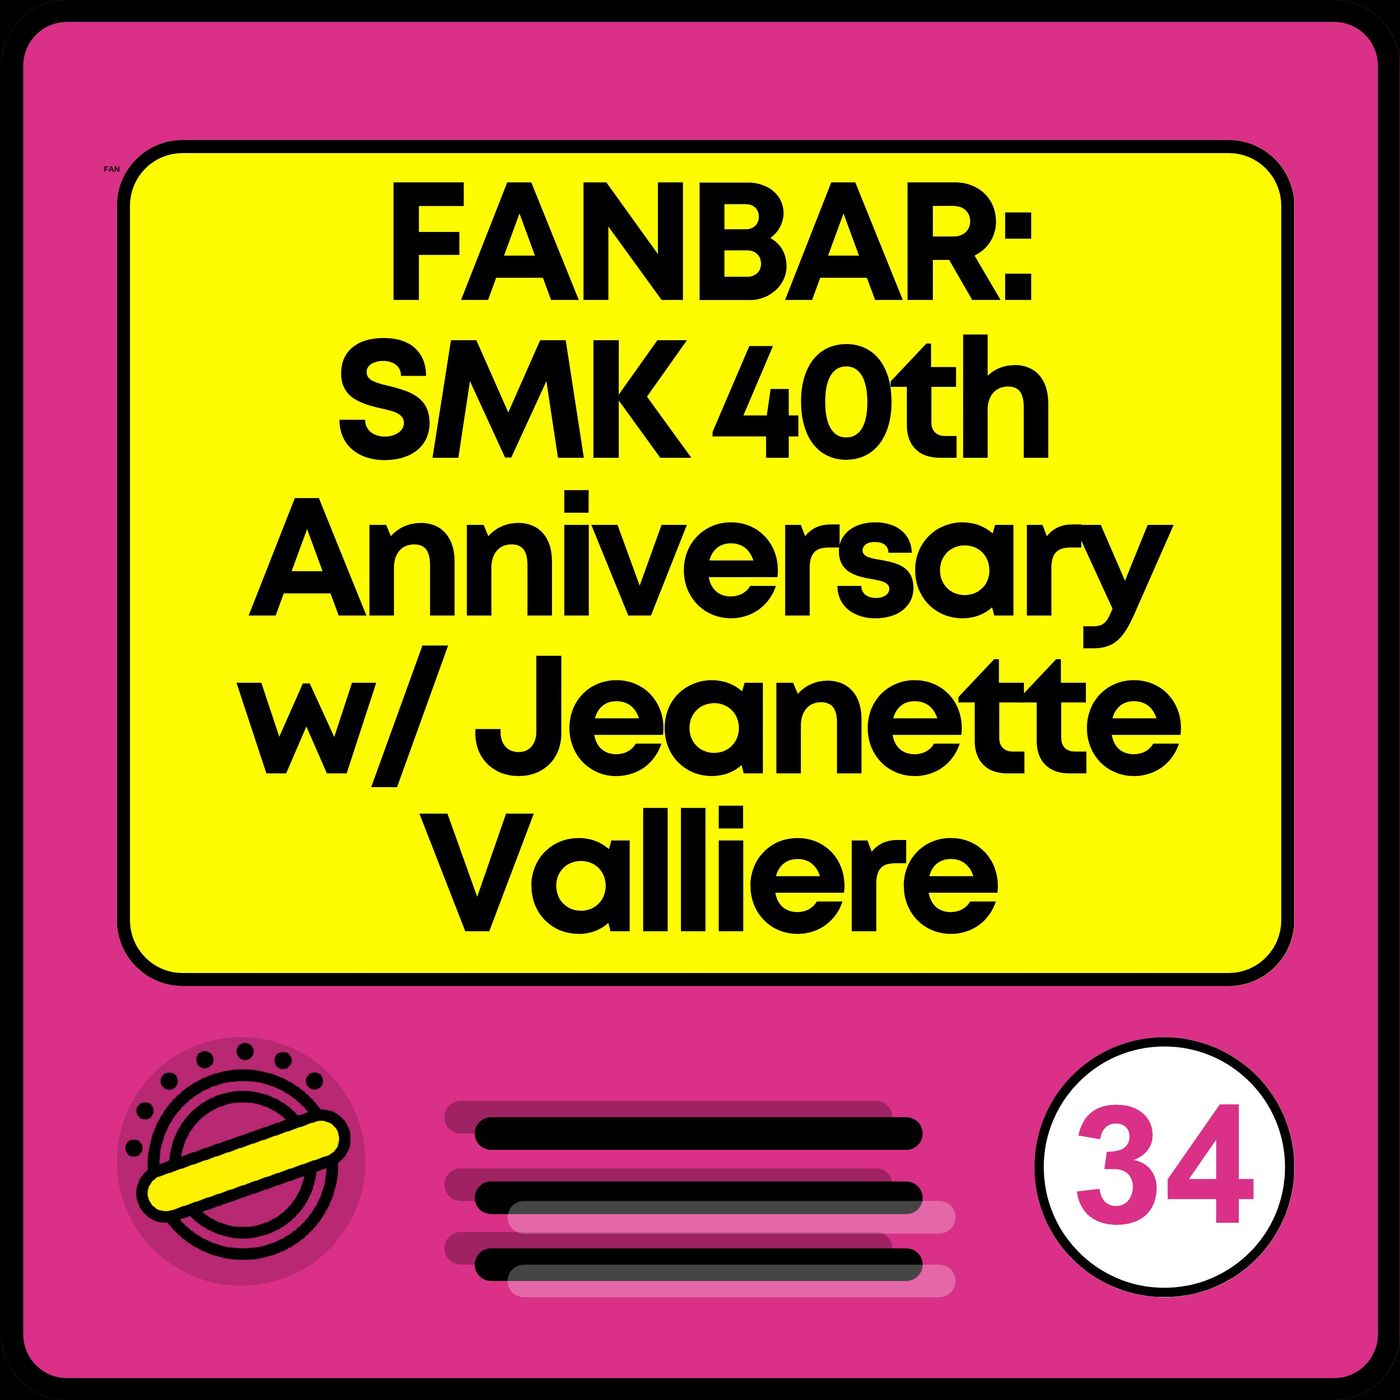 FANBAR: SMK 40th Anniversary with Jeanette Valliere